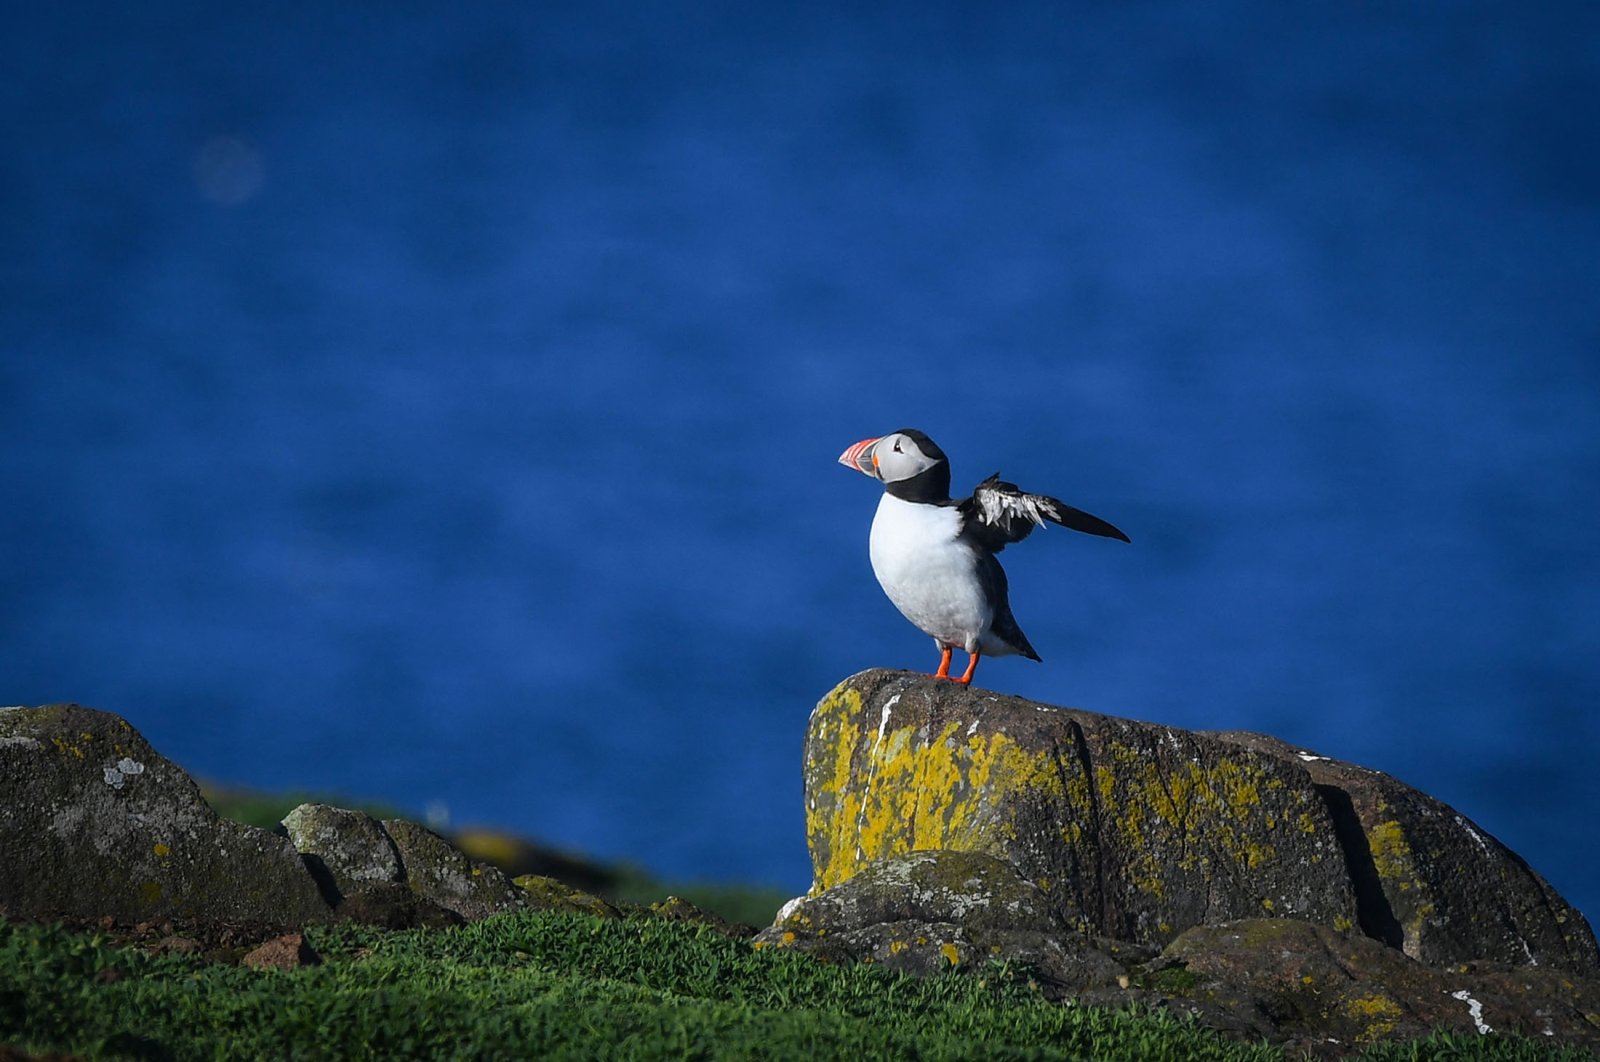 A puffin on the Isle of May National Nature Reserve in the Firth Of Forth off the East Coast of Scotland, U.K., April 19, 2022. (AFP Photo)